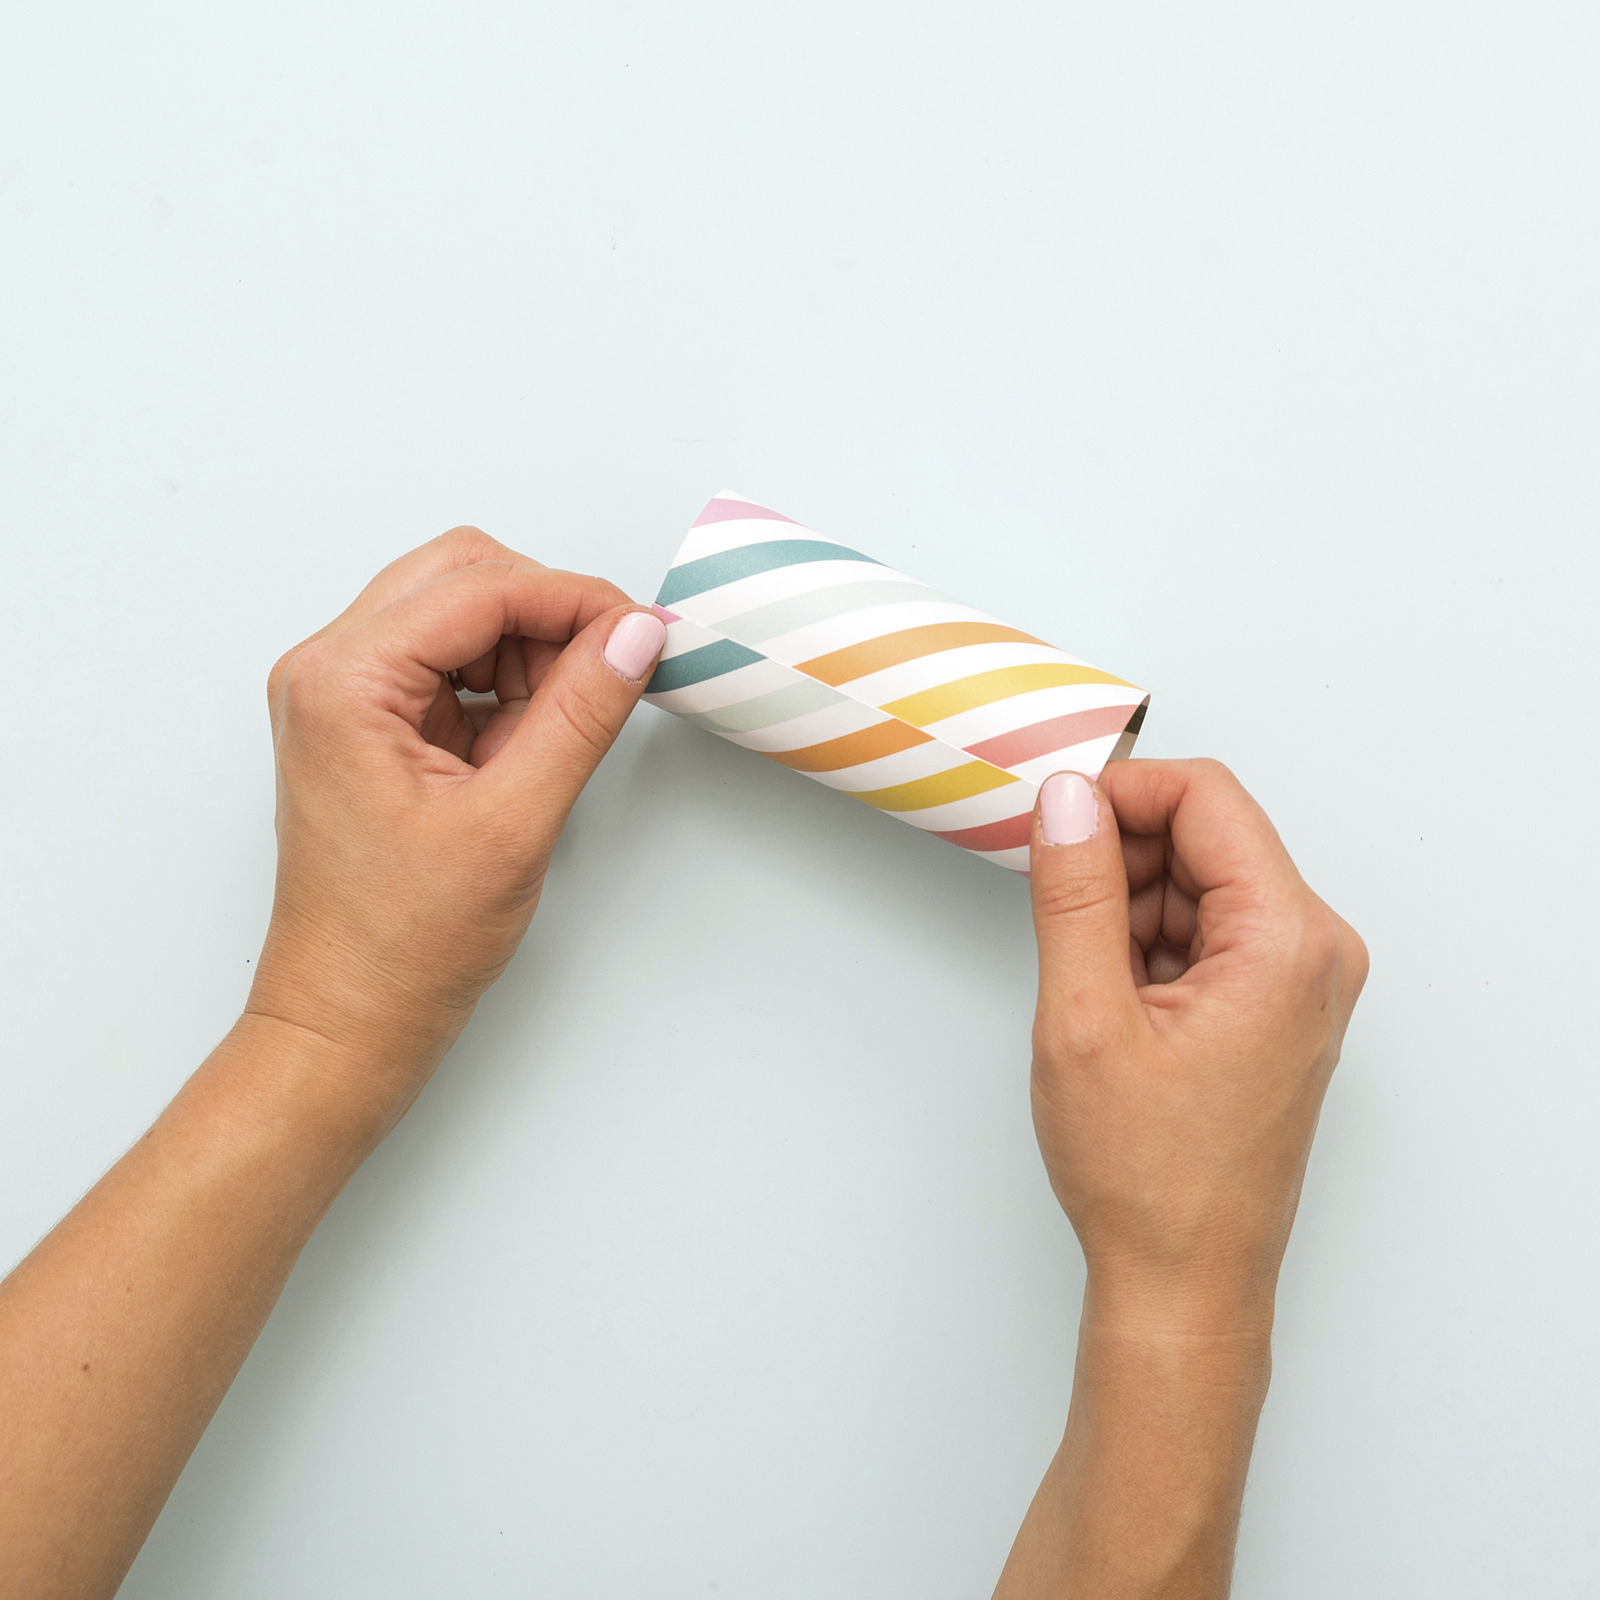 How to Make Simple Paper Candy Cones. Turn a piece of paper into a fun party favor or gift idea in four simple steps! 